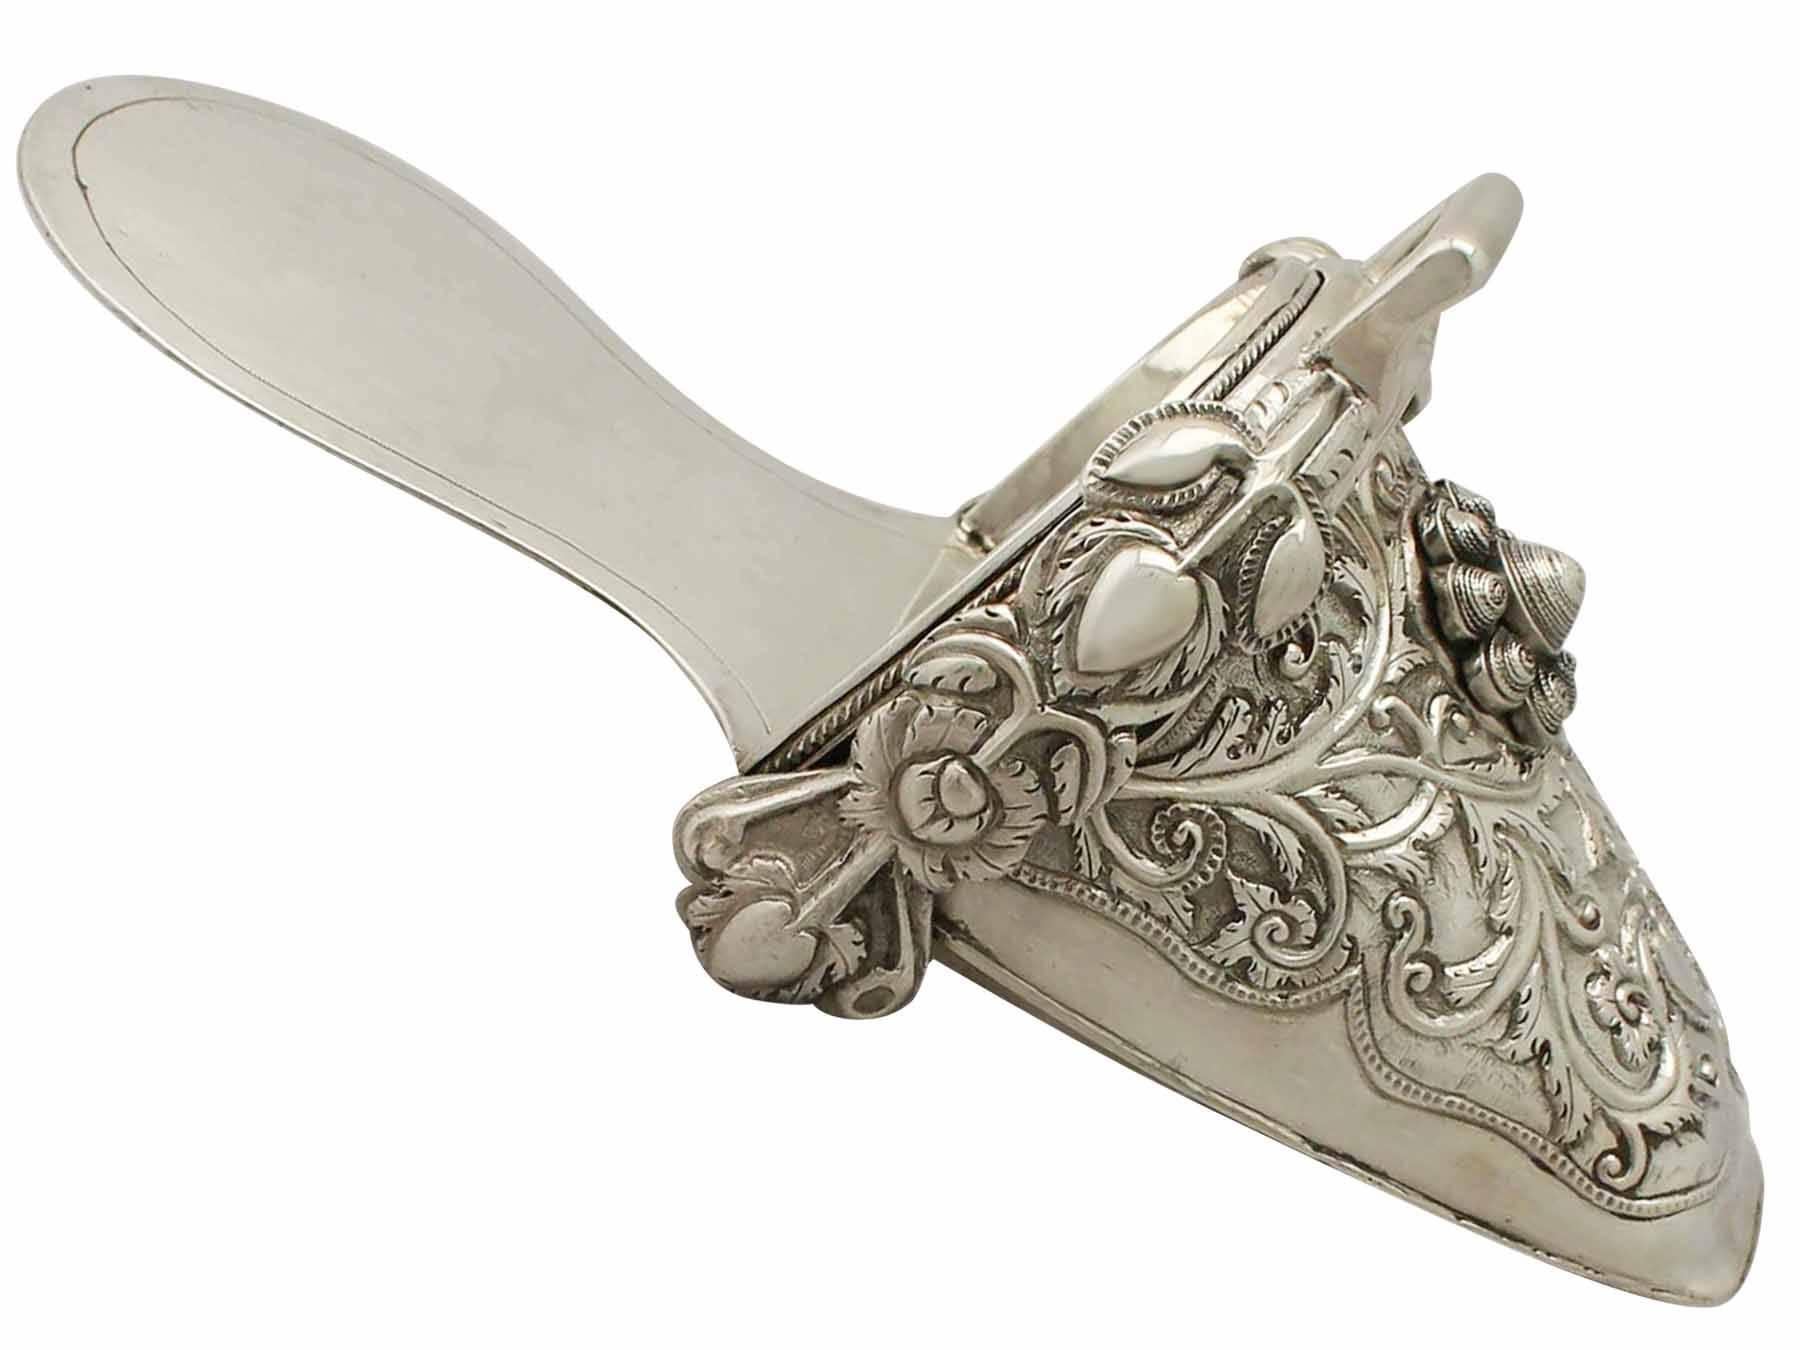 South American 1850s Antique Sterling Silver Sidesaddle Slipper Stirrup